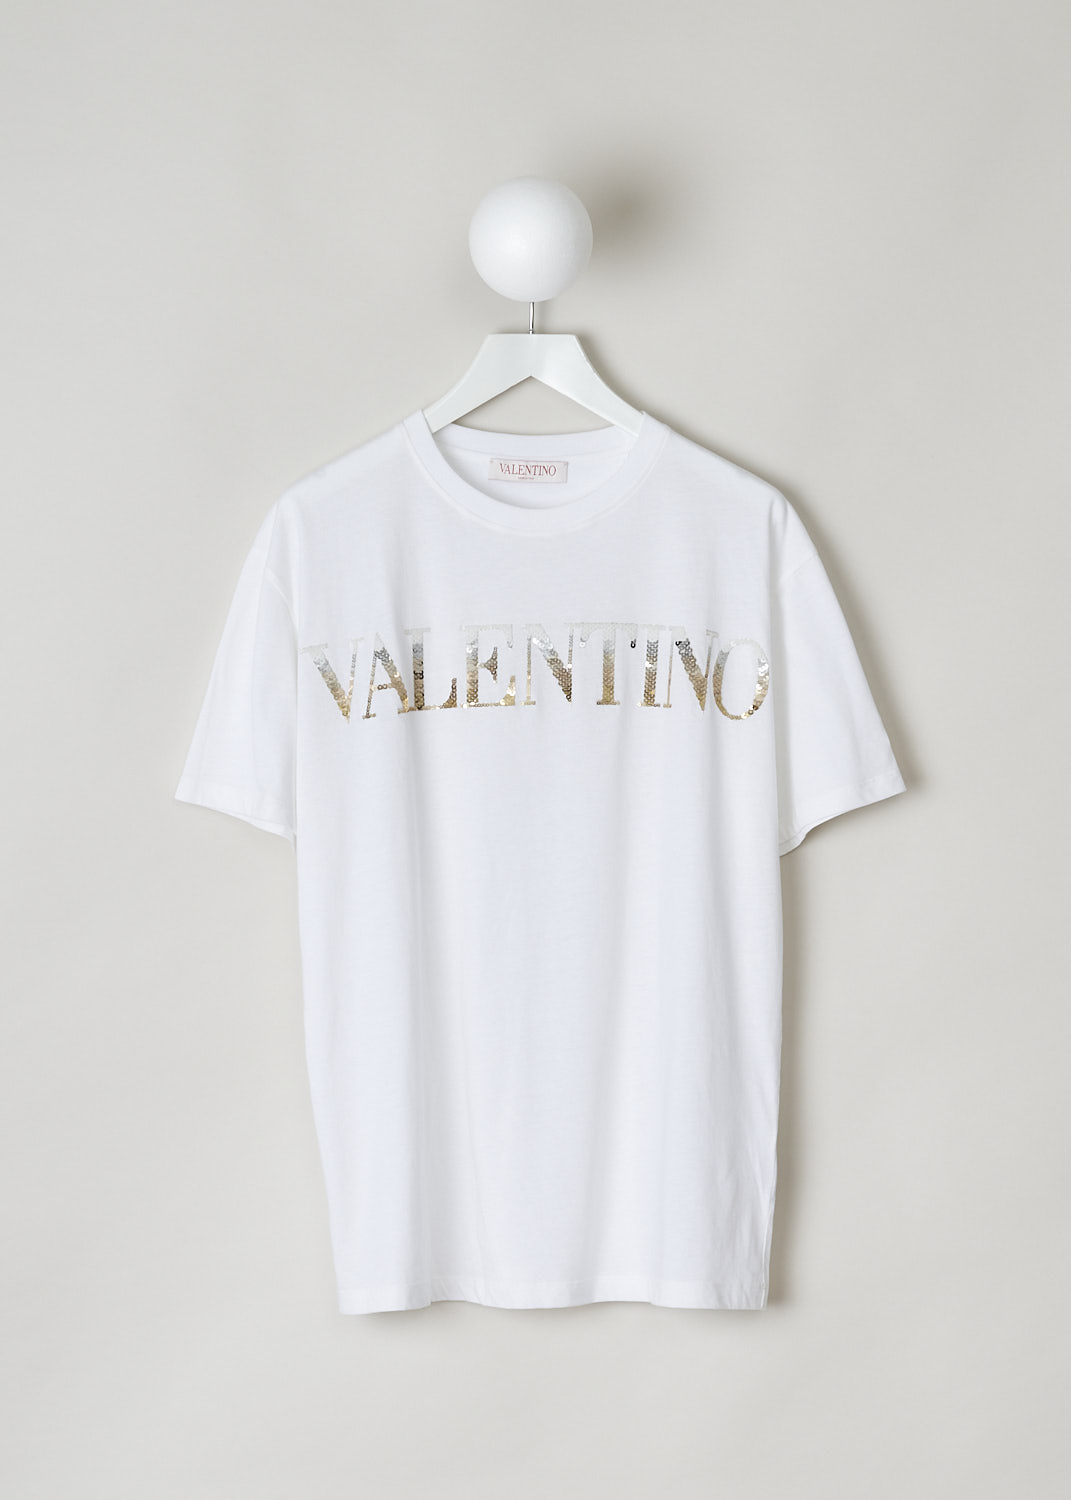 VALENTINO, WHITE T-SHIRT WITH SEQUIN LETTERING, 1B3MG18W7DN_0BO, White, Front, This white T-shirt has the brand's lettering in ombre sequins across the chest. The shirt has a round neckline and short sleeves. 
